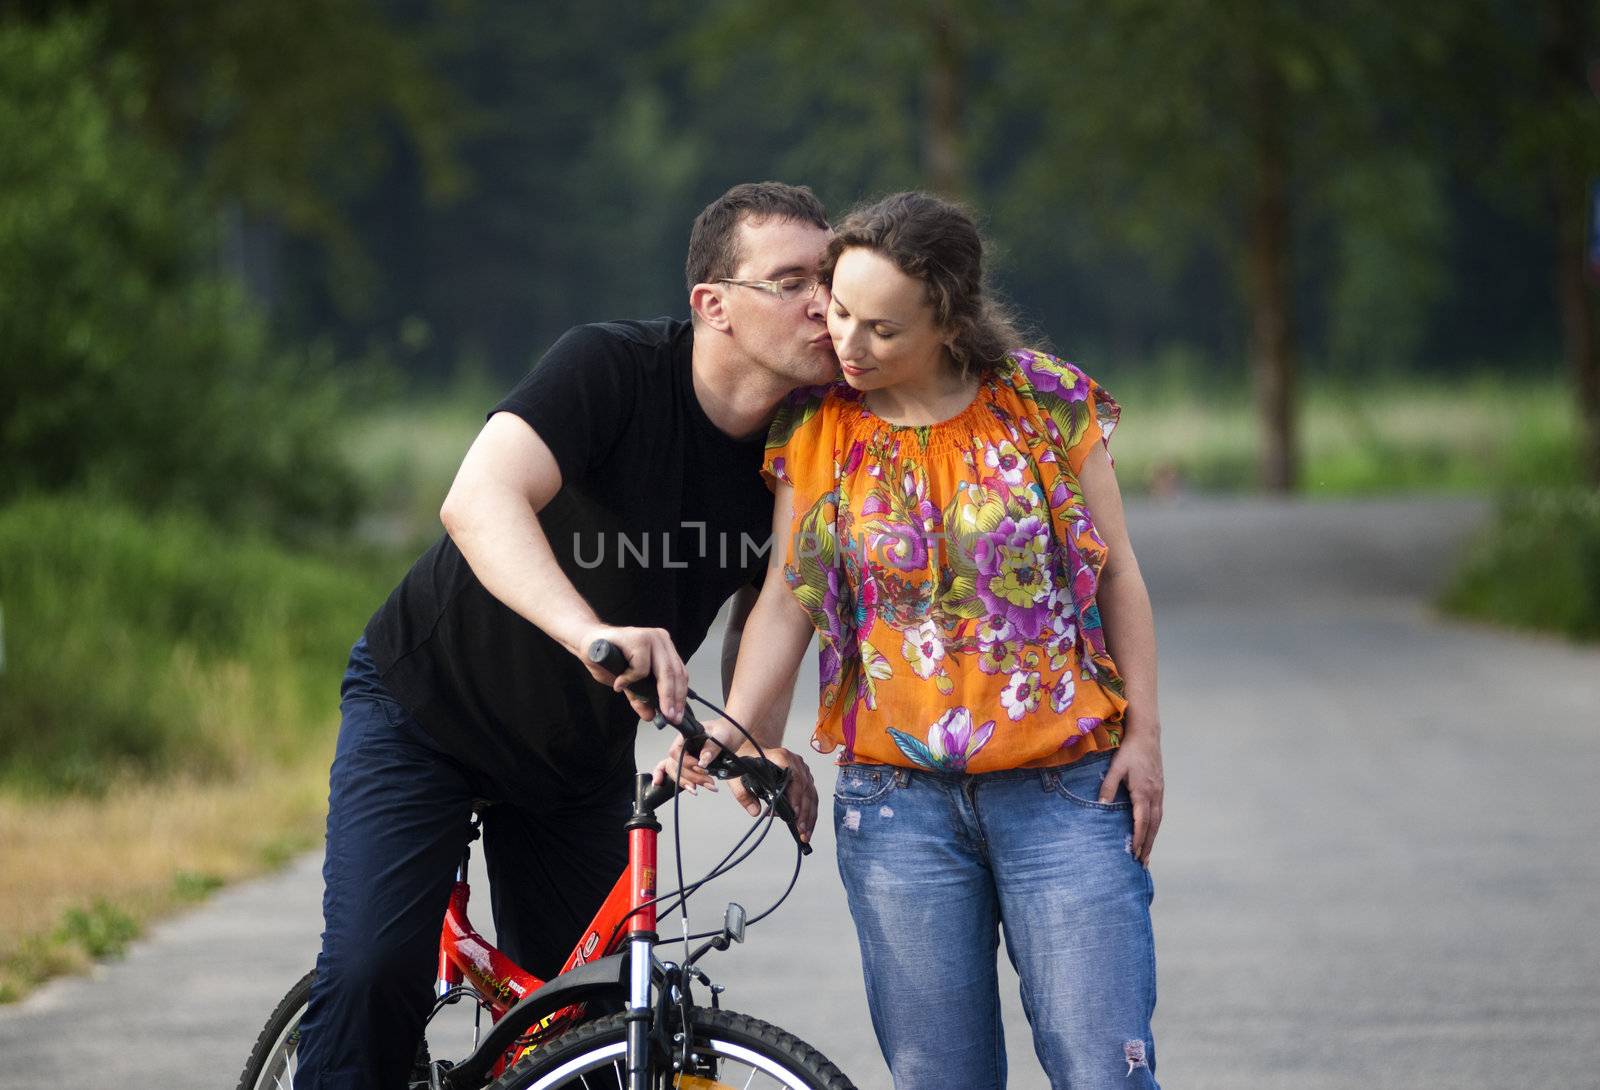 Happy couple in park with red bicycle